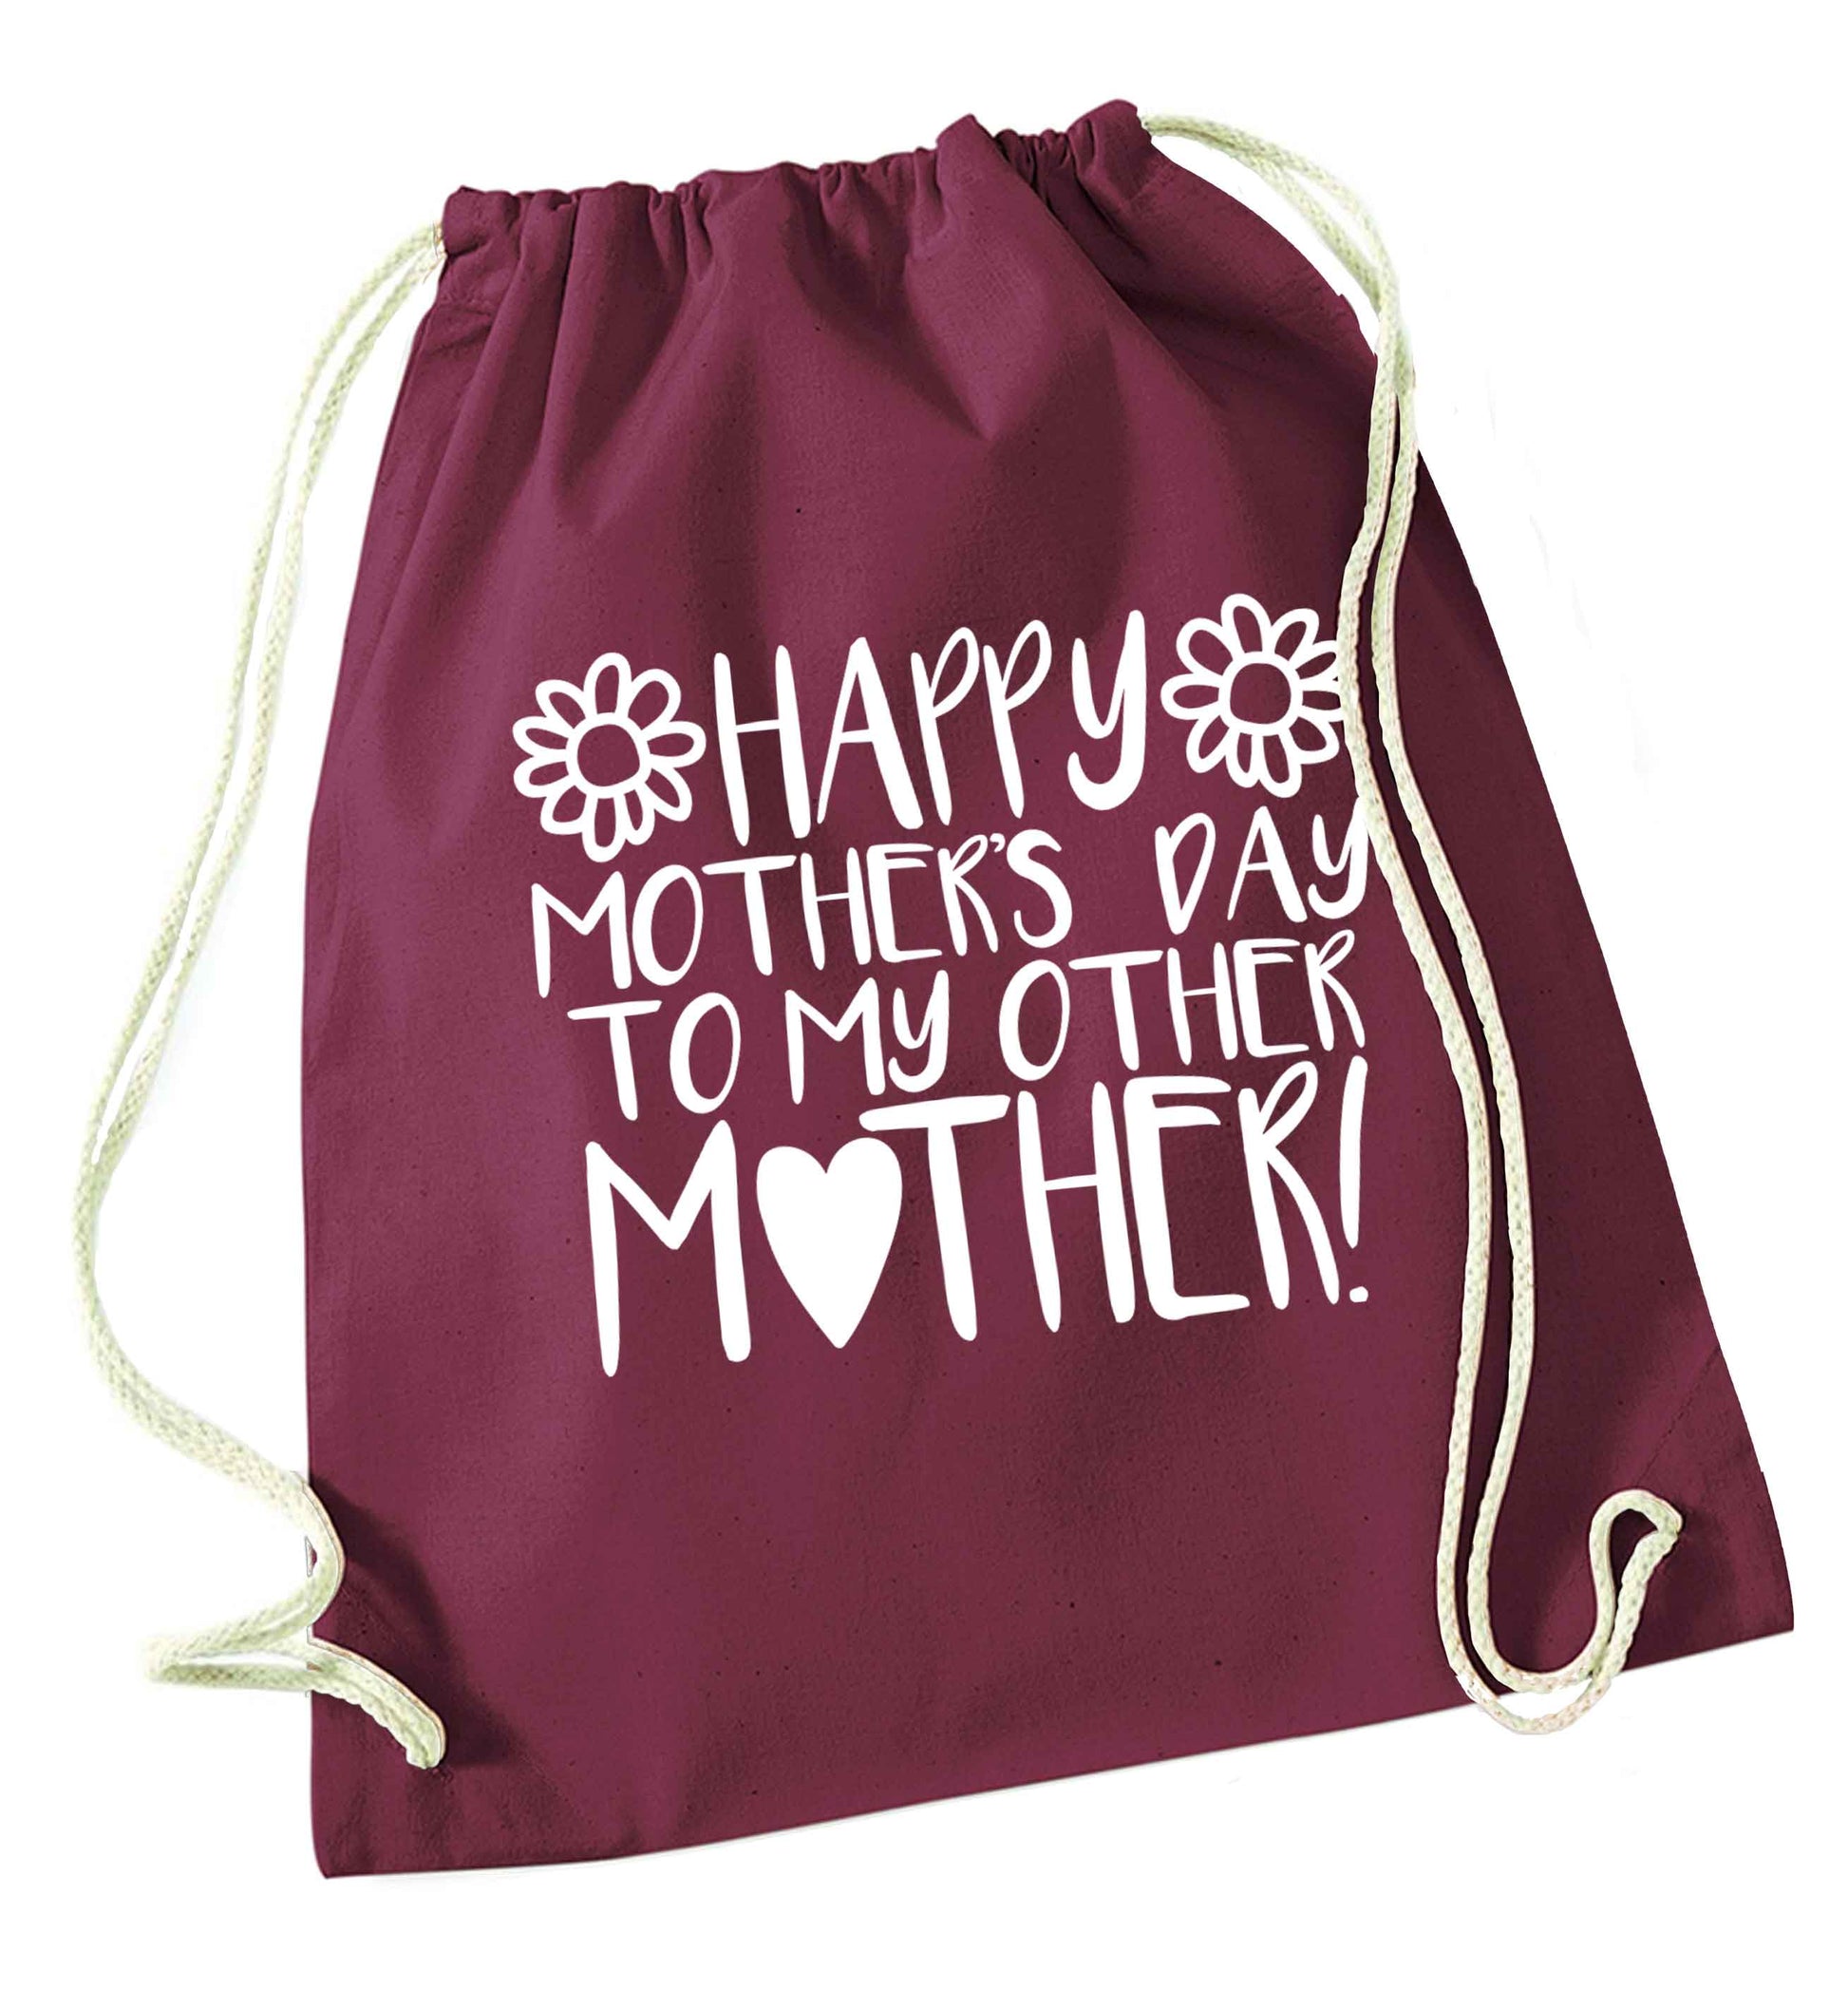 Happy mother's day to my other mother maroon drawstring bag